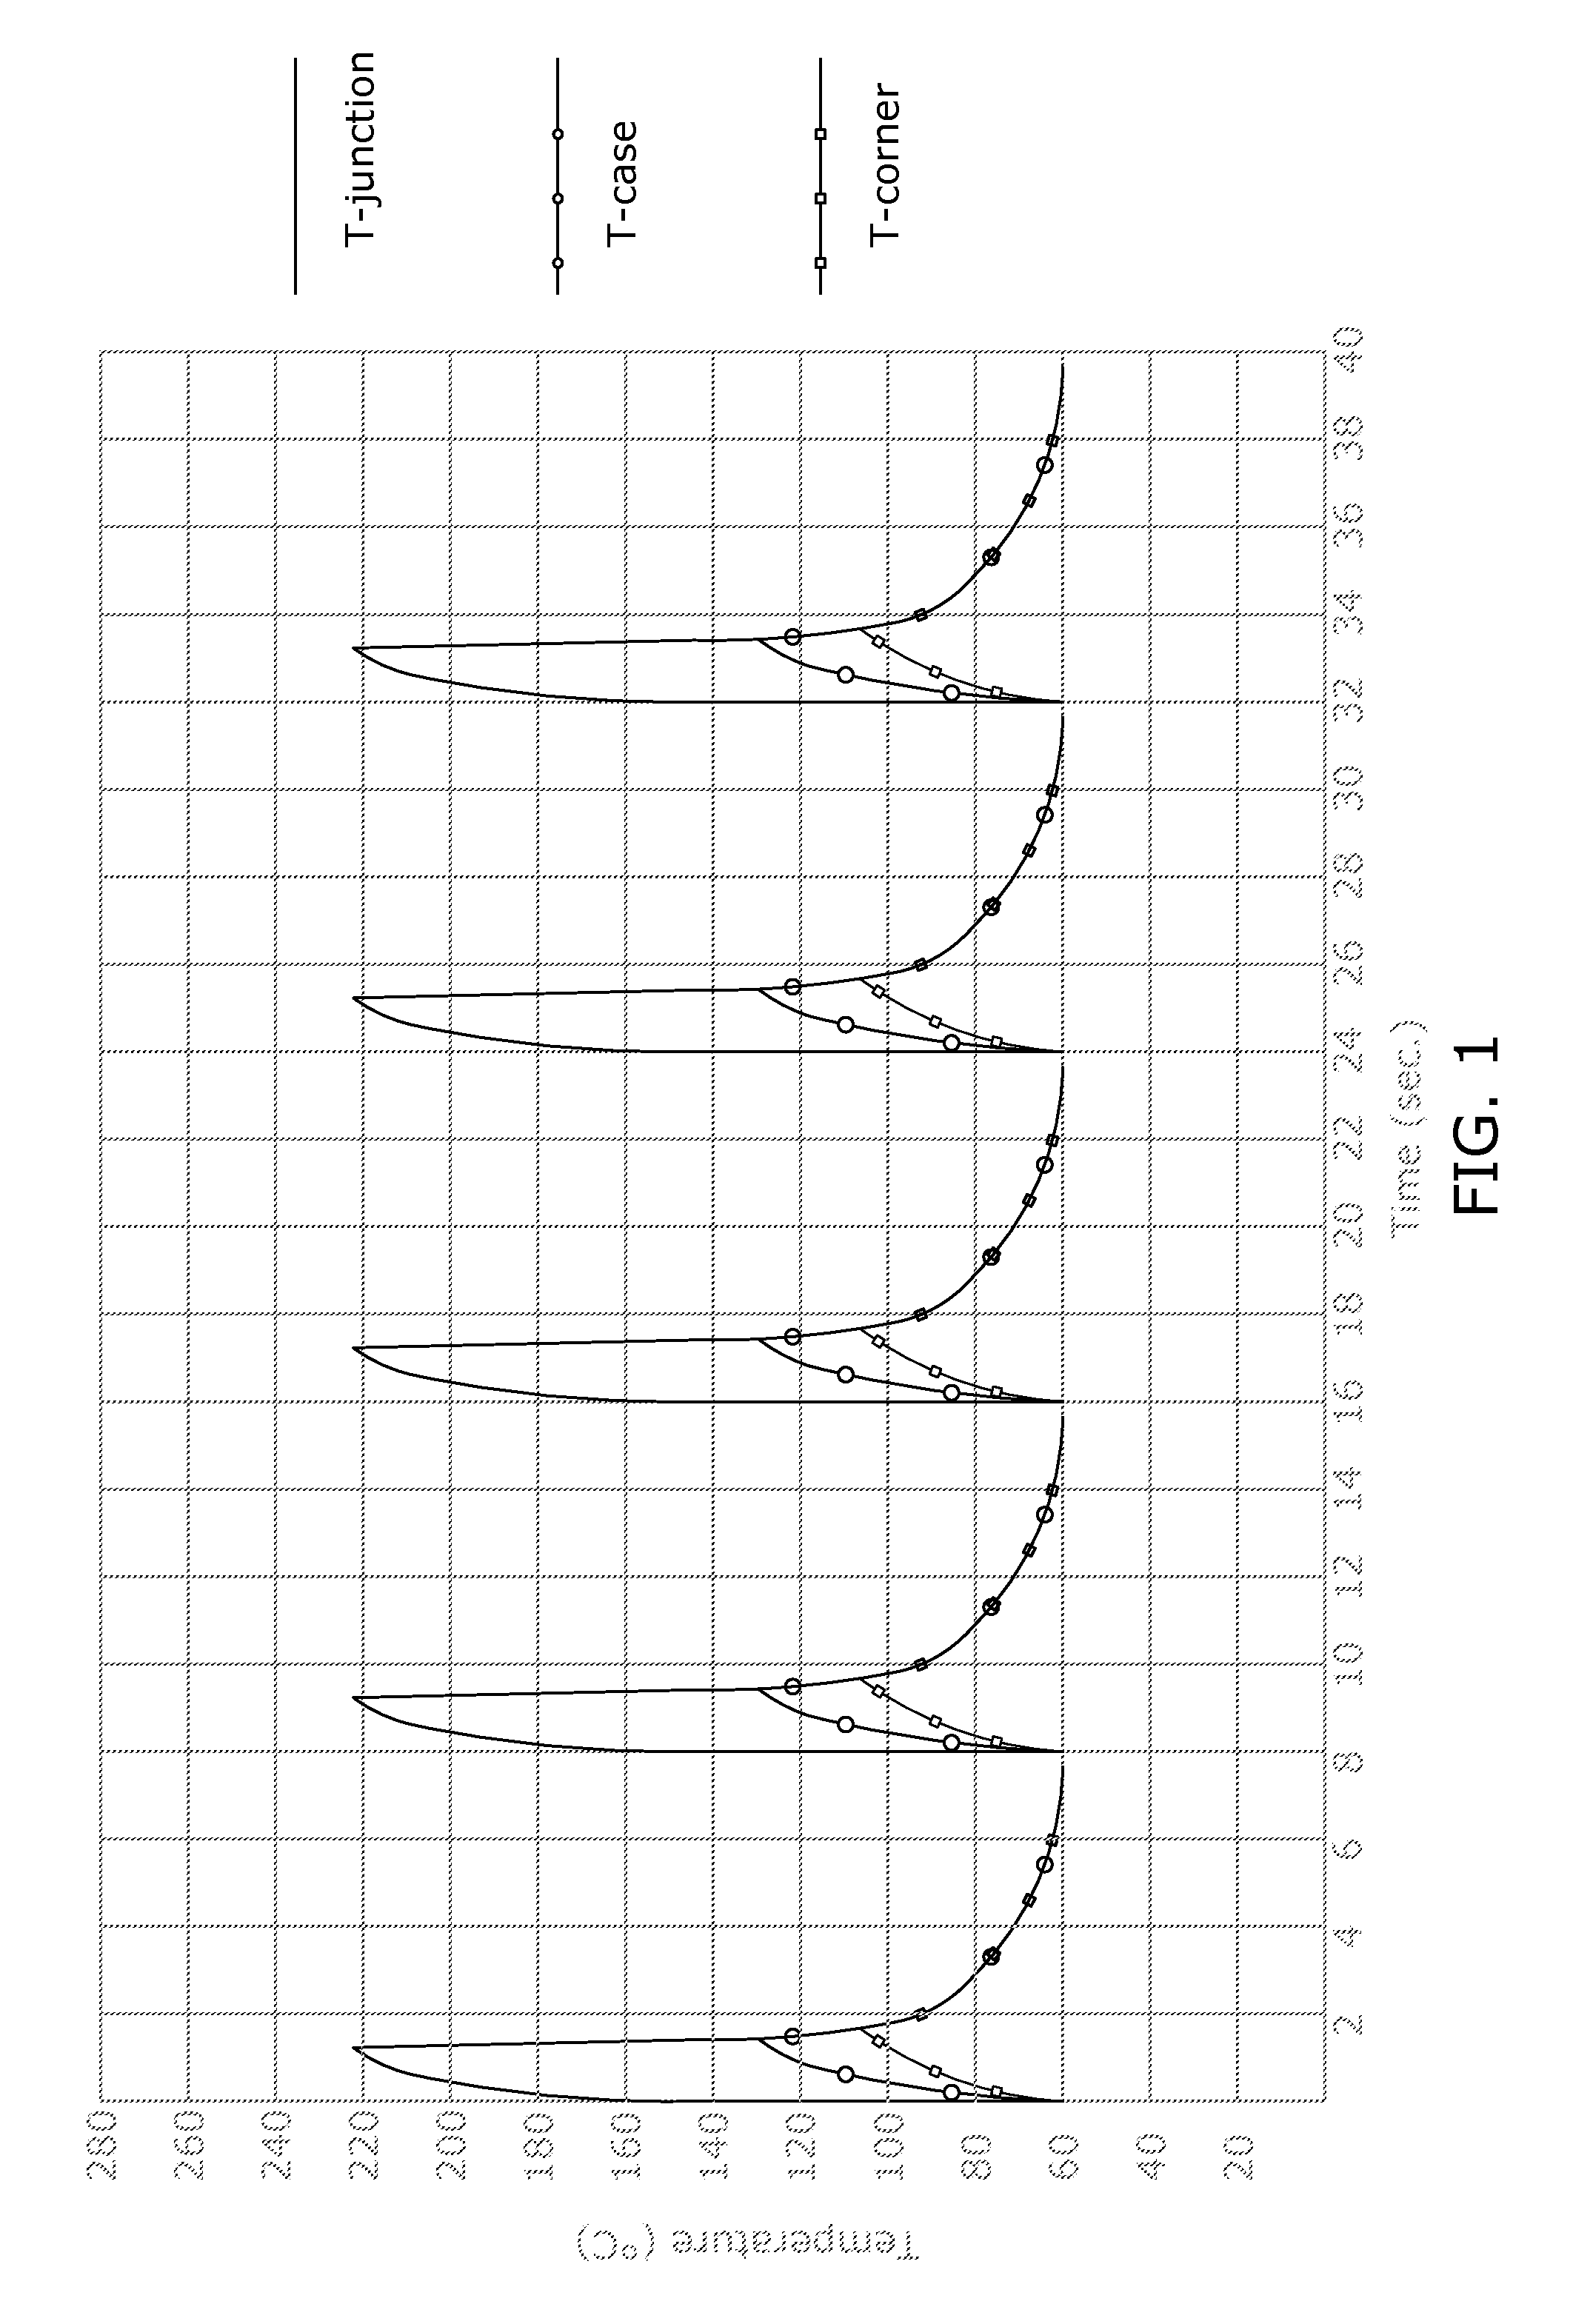 Electrical apparatus and control system